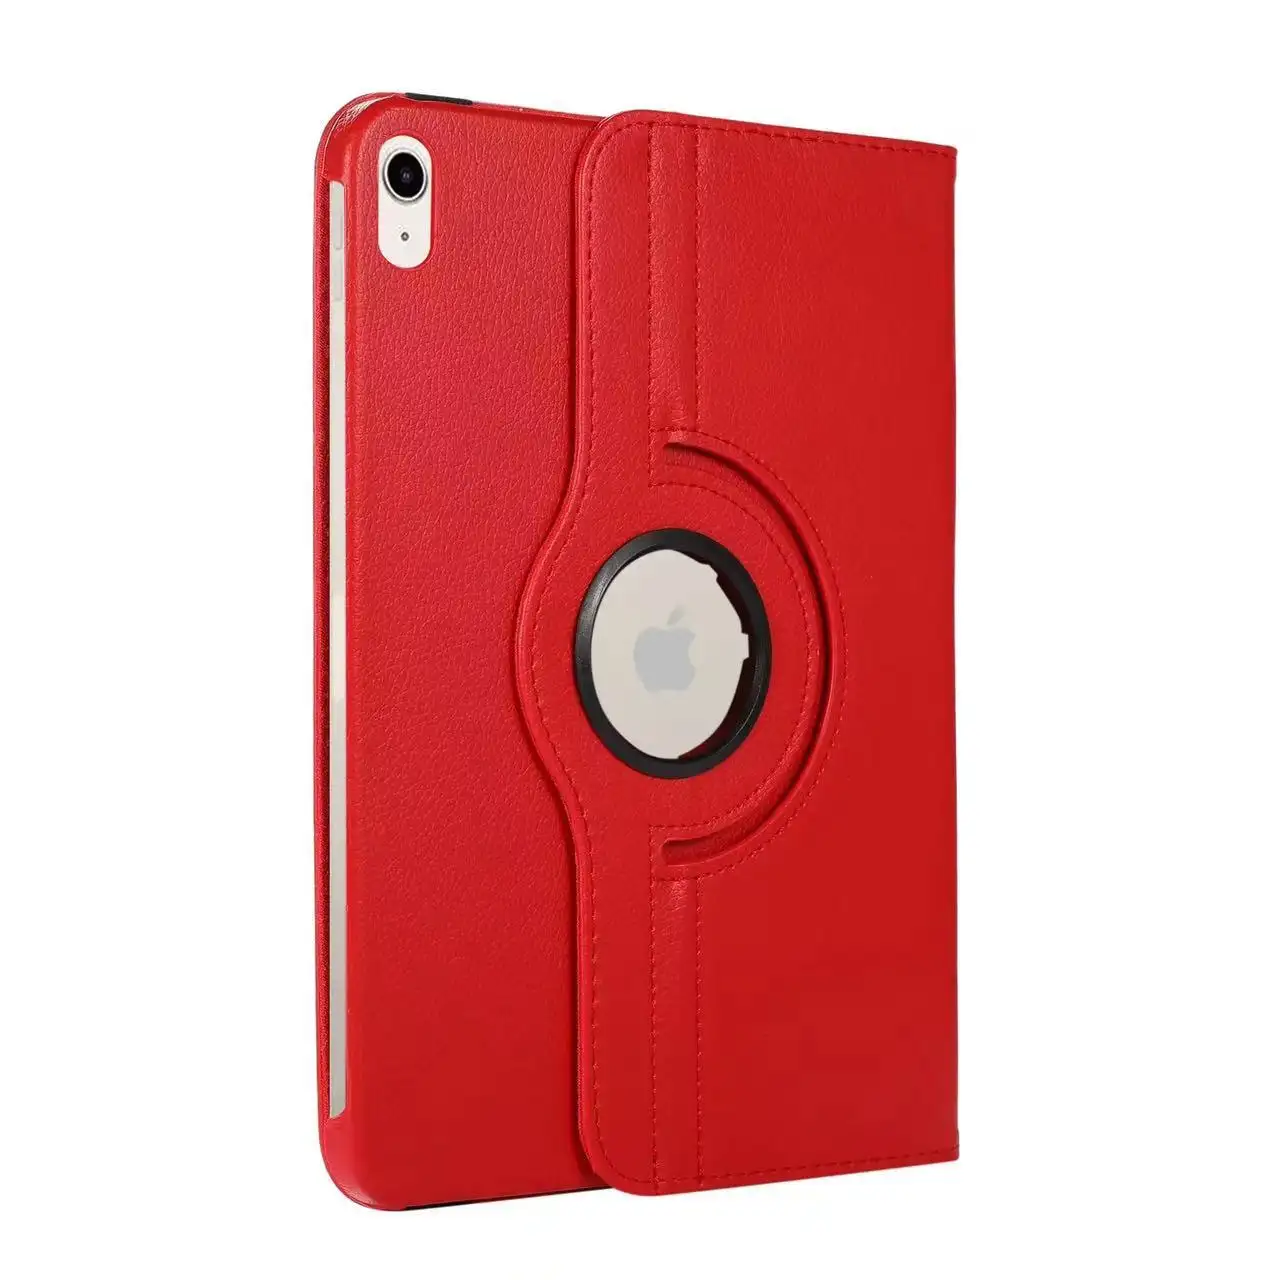 New model 10.9 inch 360 Degree Rotatable Swivel smart Flip Stand PU Leather material Tablet cover Case For iPad 10